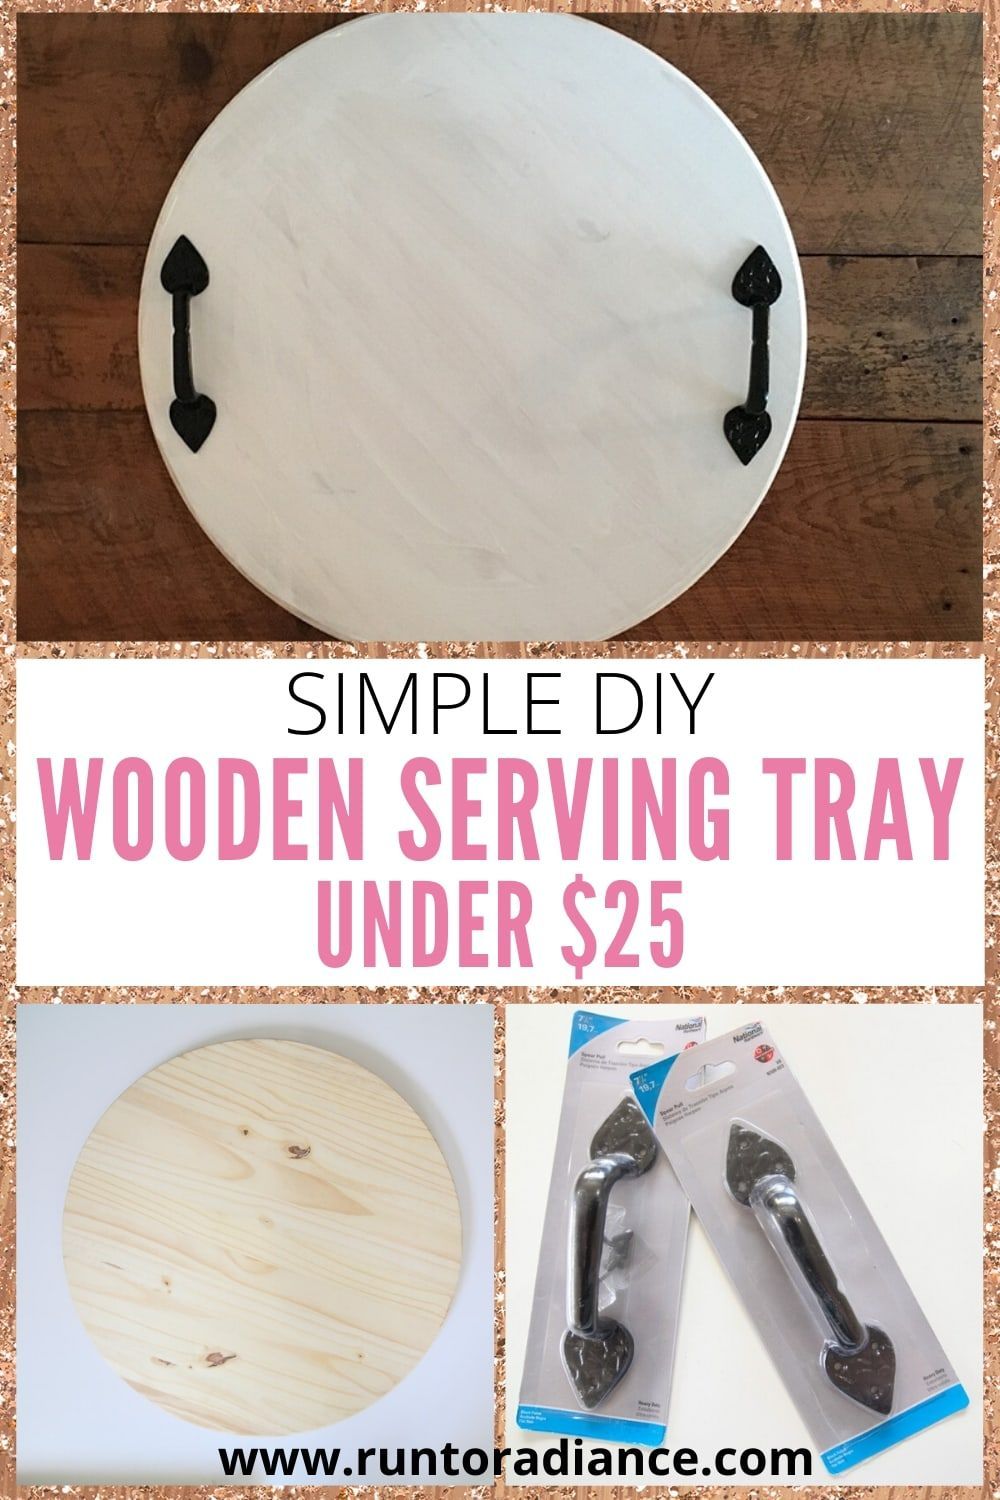 DIY Wooden Serving Tray -   17 diy projects Wooden awesome ideas